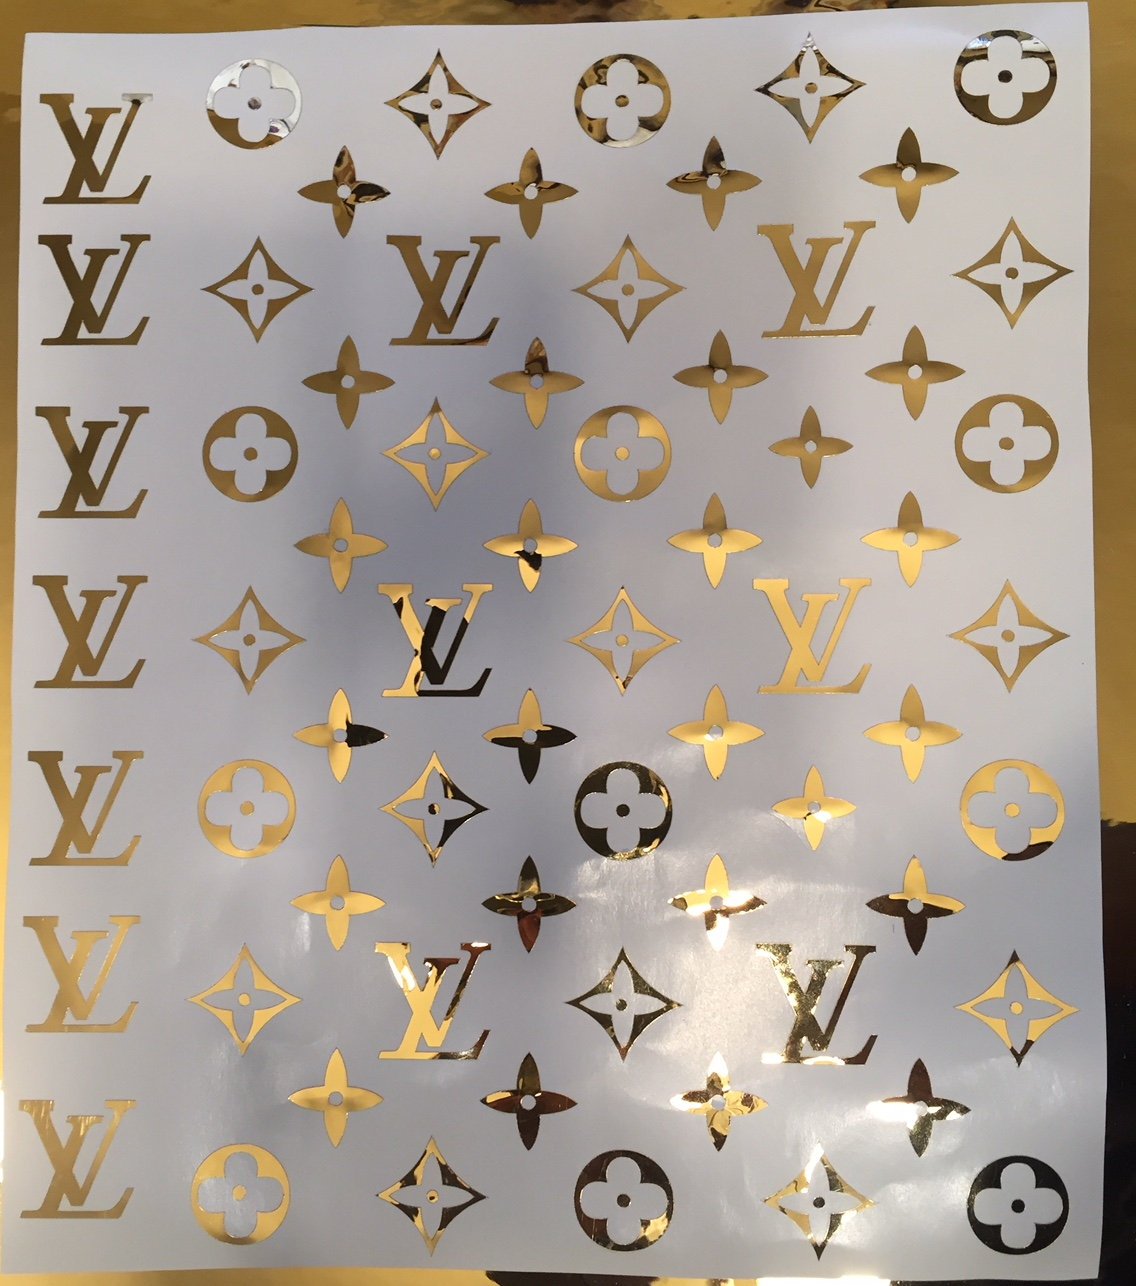 Georges VUITTON : Family tree by Base collaborative Pierfit